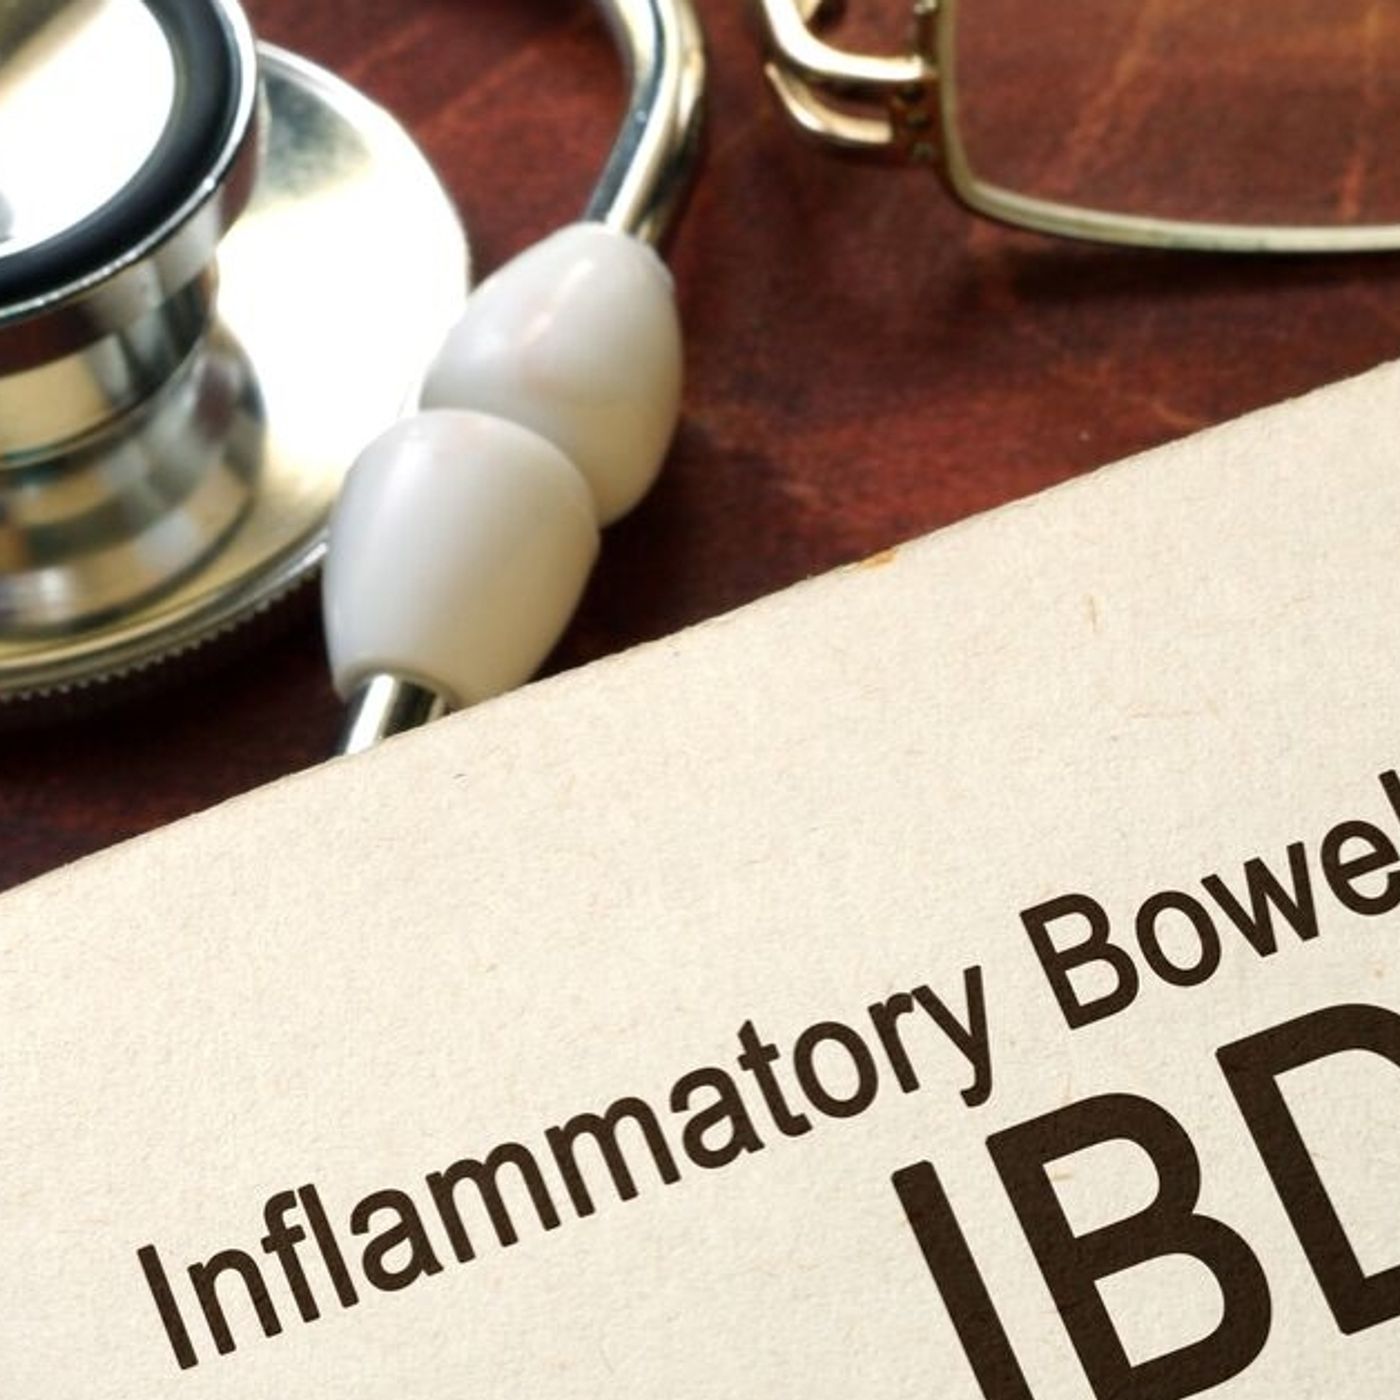 51: Inflammatory Bowel Disease: in conversation with an IBD Clinical Nurse Specialist